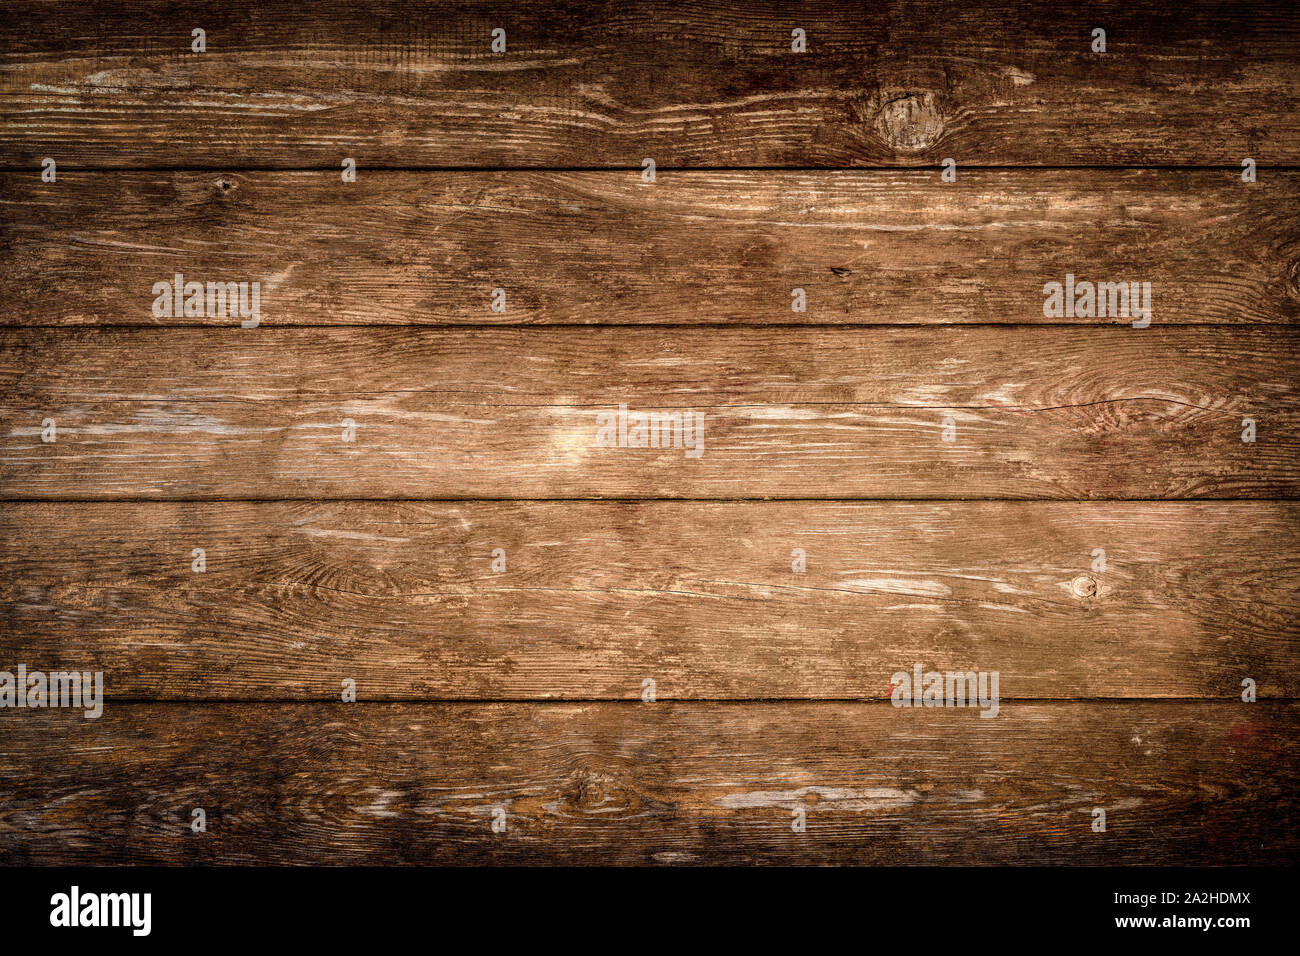 Rustic wood planks background Stock Photo